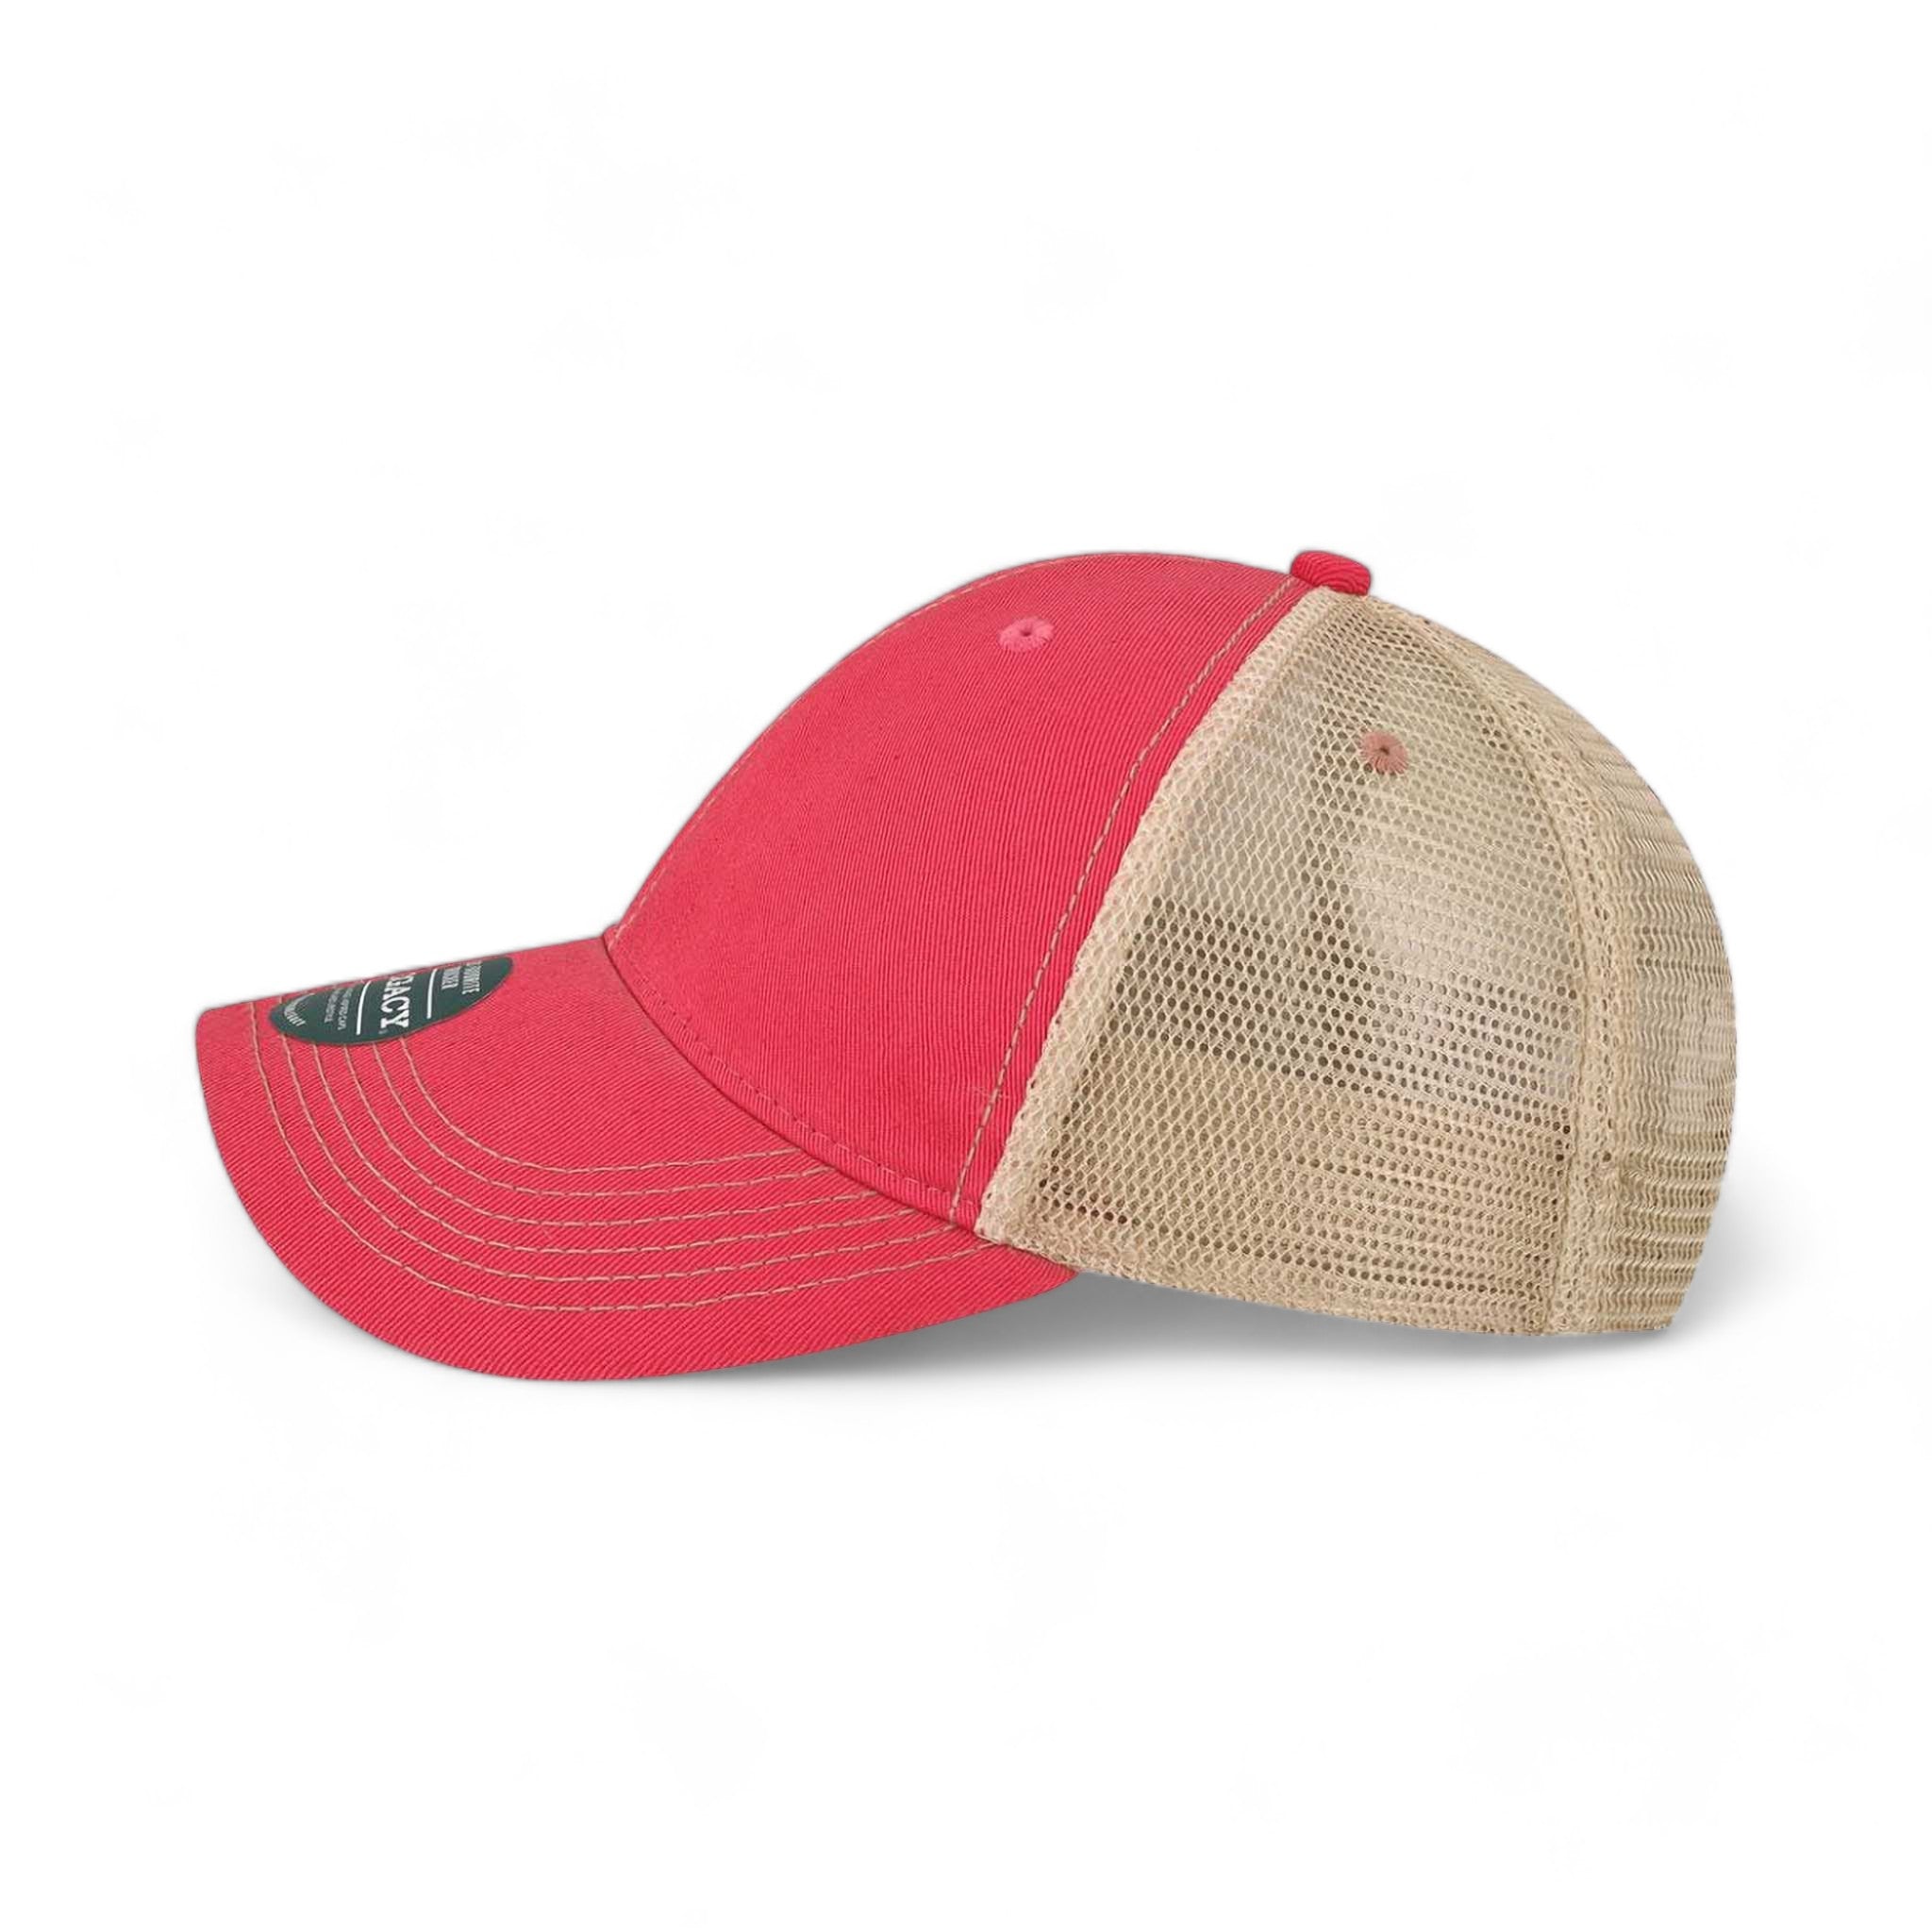 Side view of LEGACY OFAY custom hat in dark pink and khaki